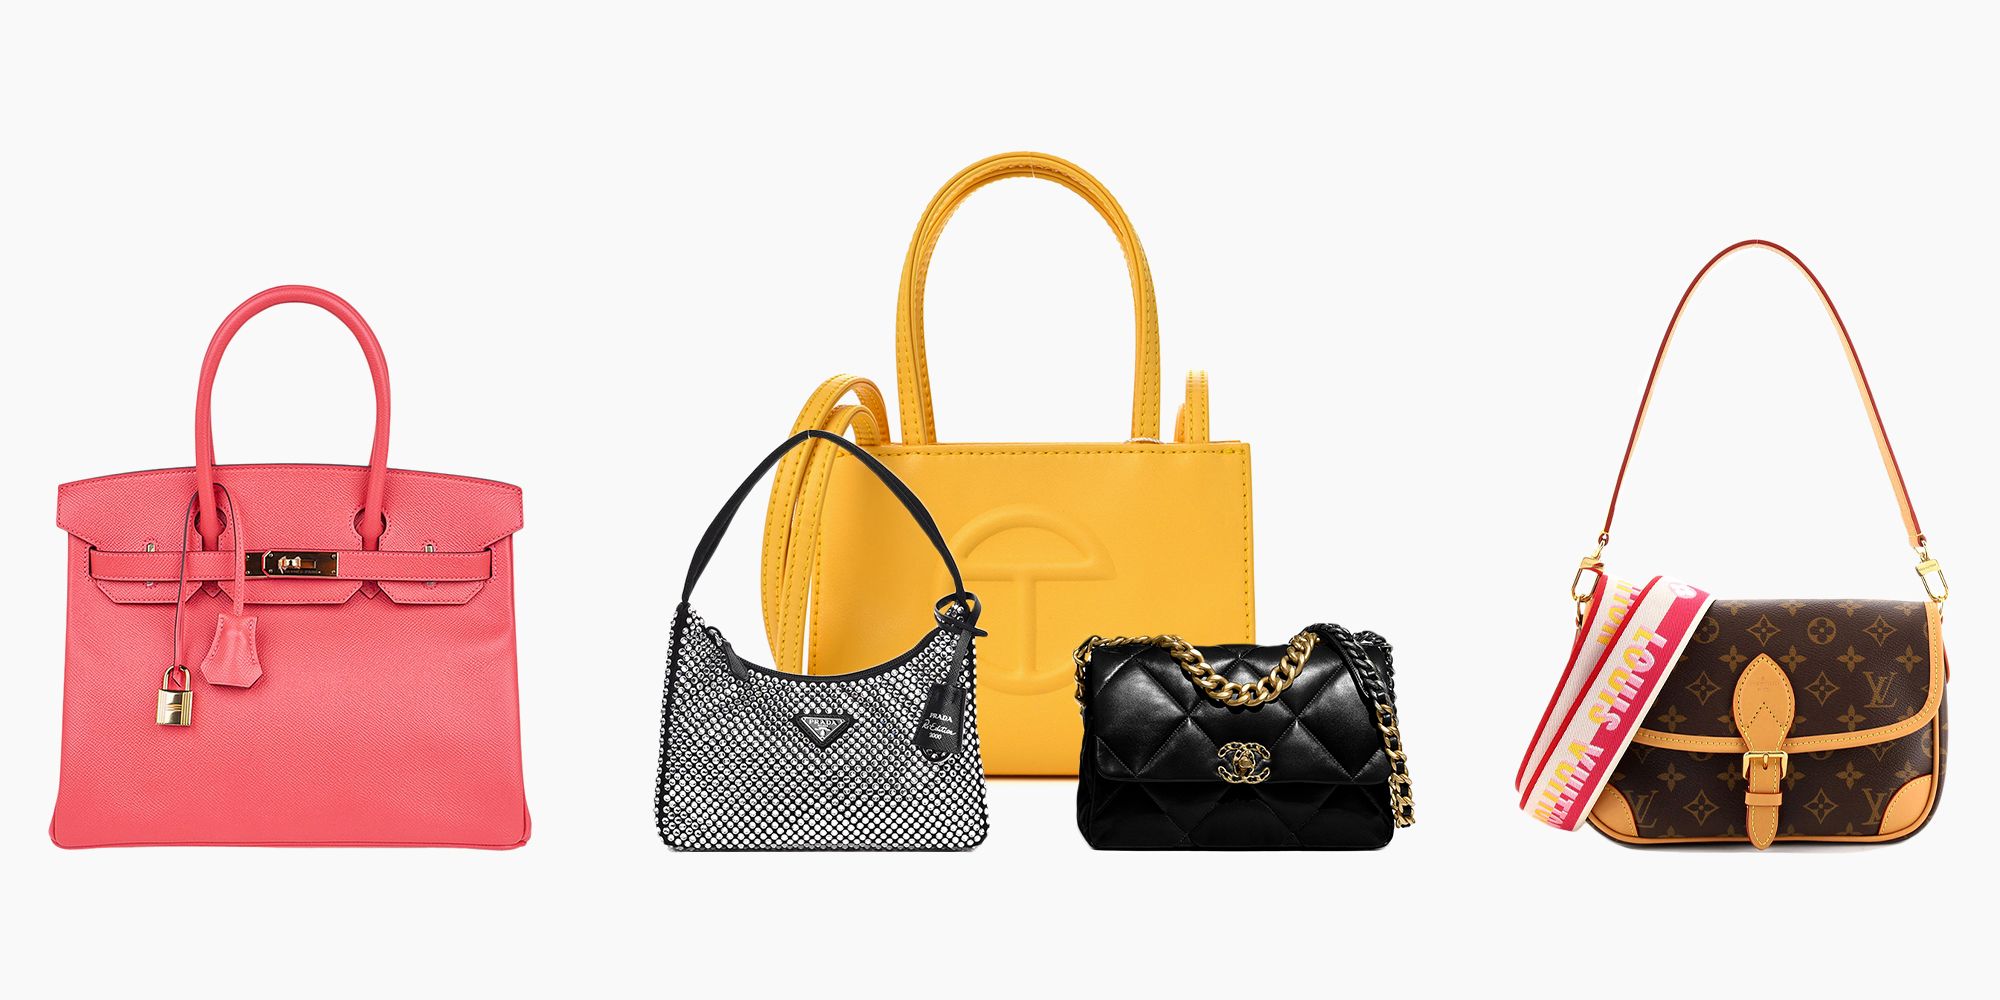 Sell Your Bag | Sell Designer Luxury Items | FASHIONPHILE